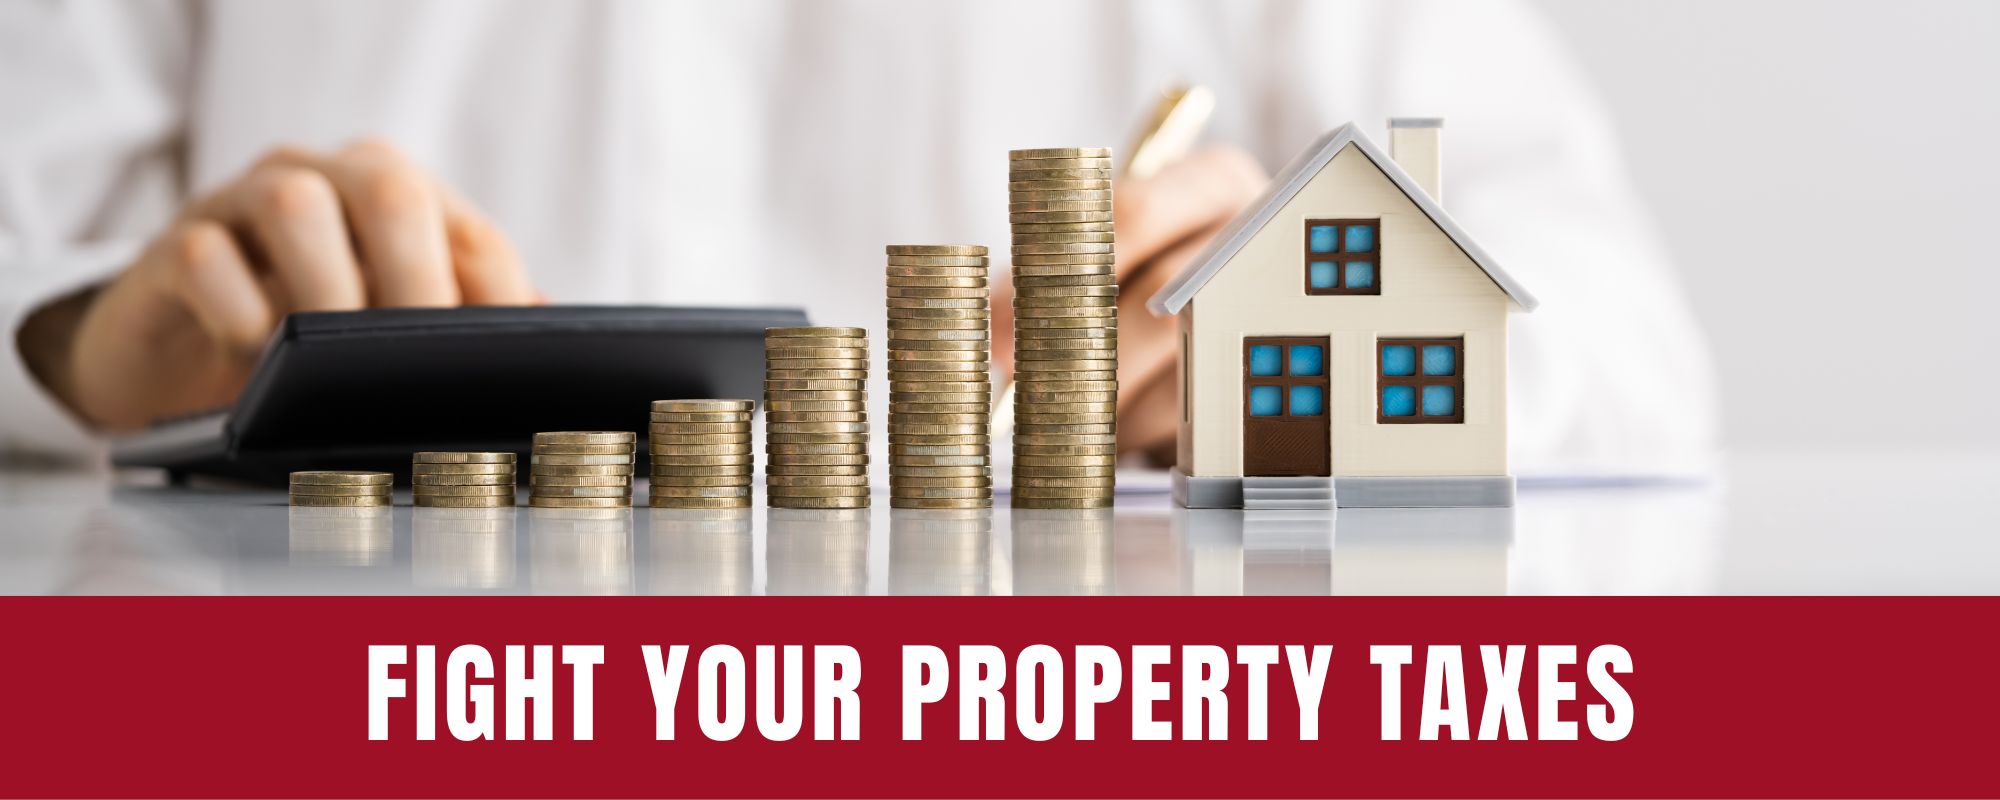 Fight Property Taxes